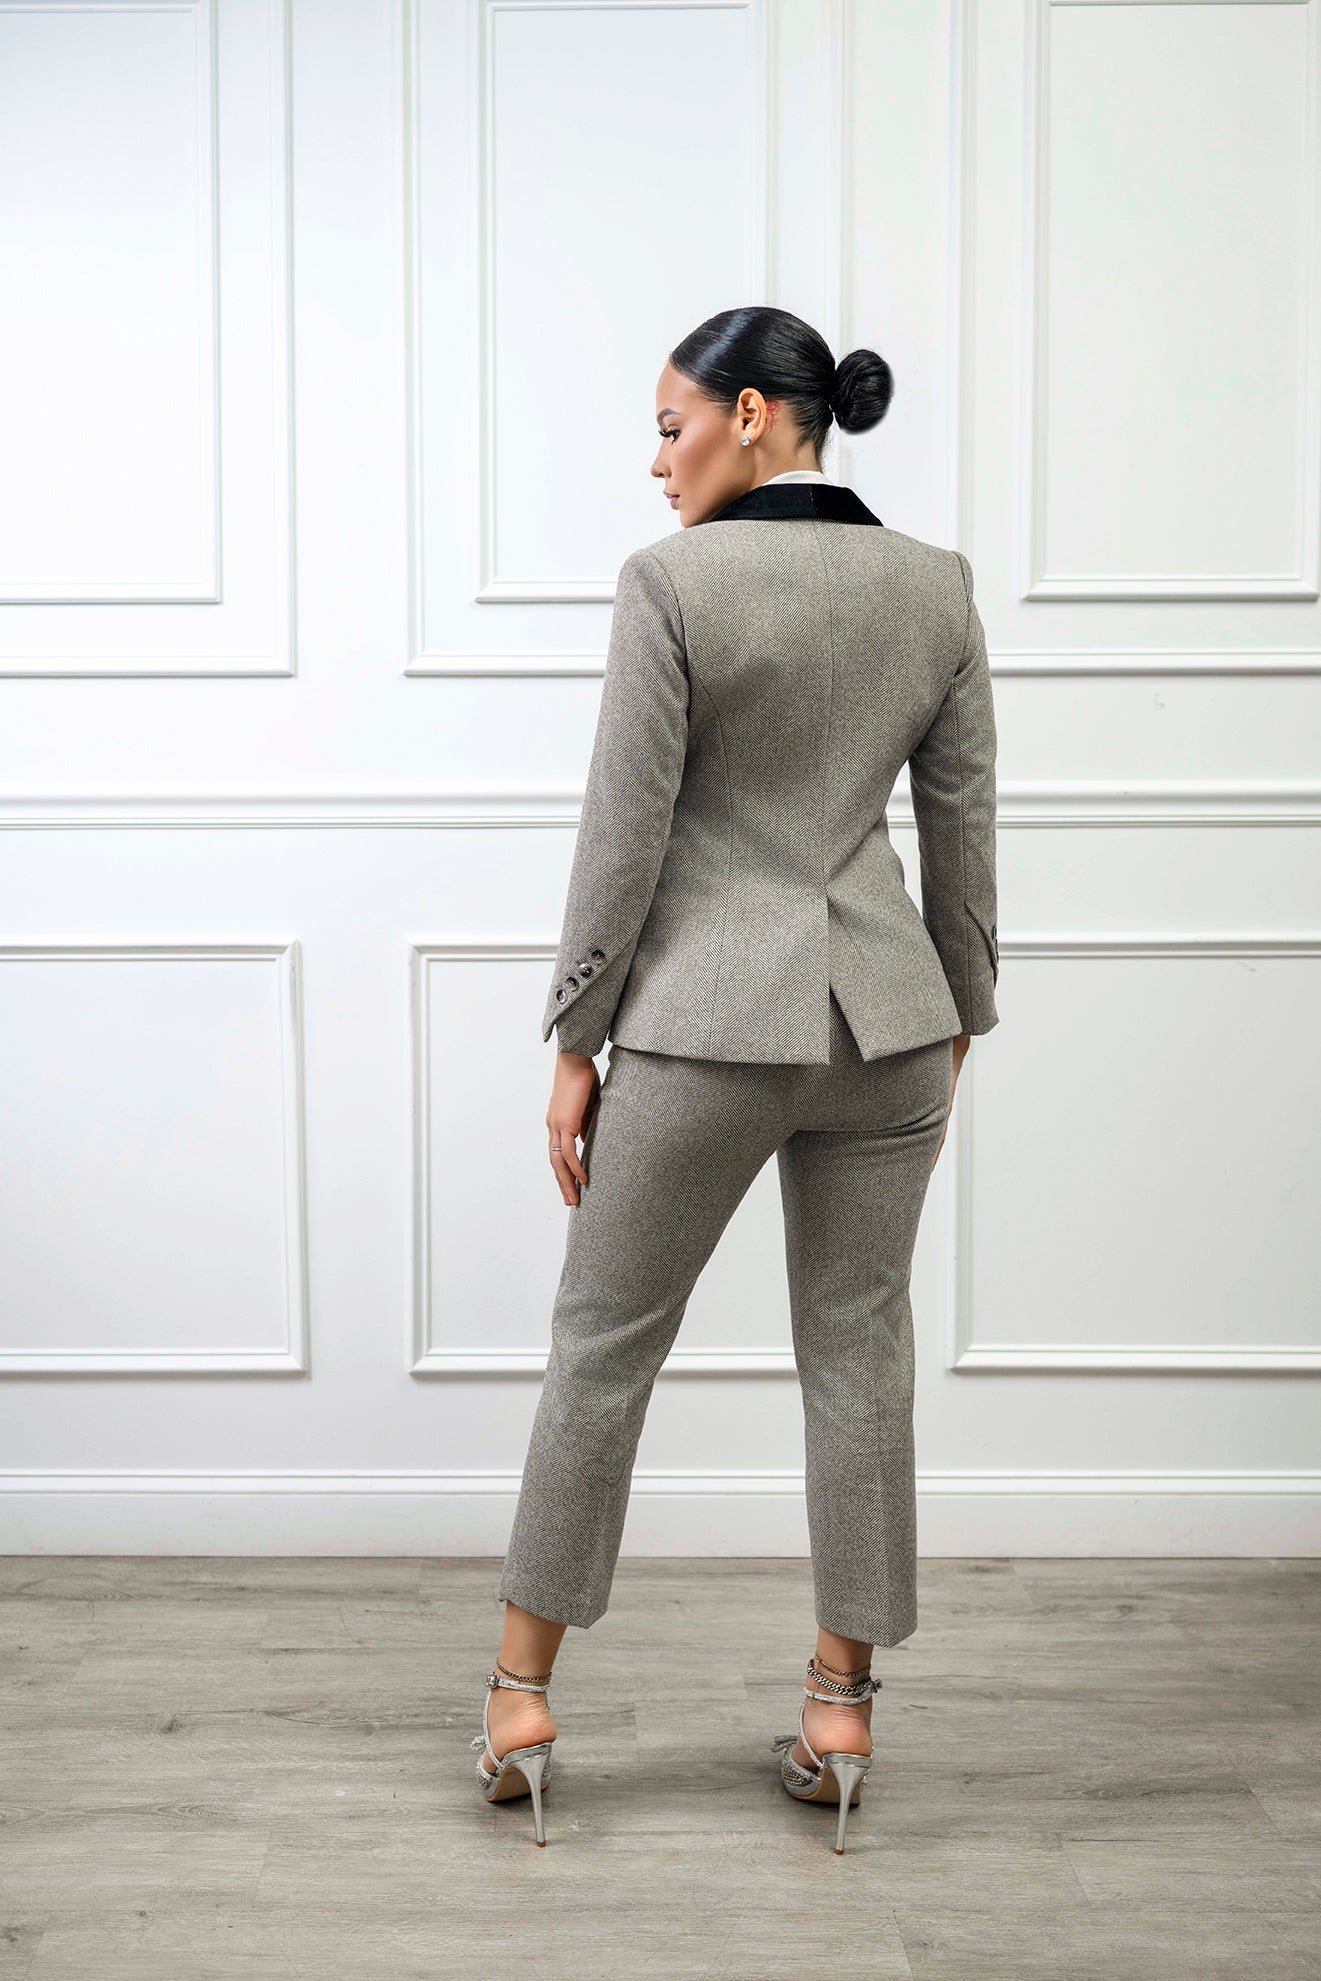 Attorney at Law Suit - Preorder - Belle Business Wear 